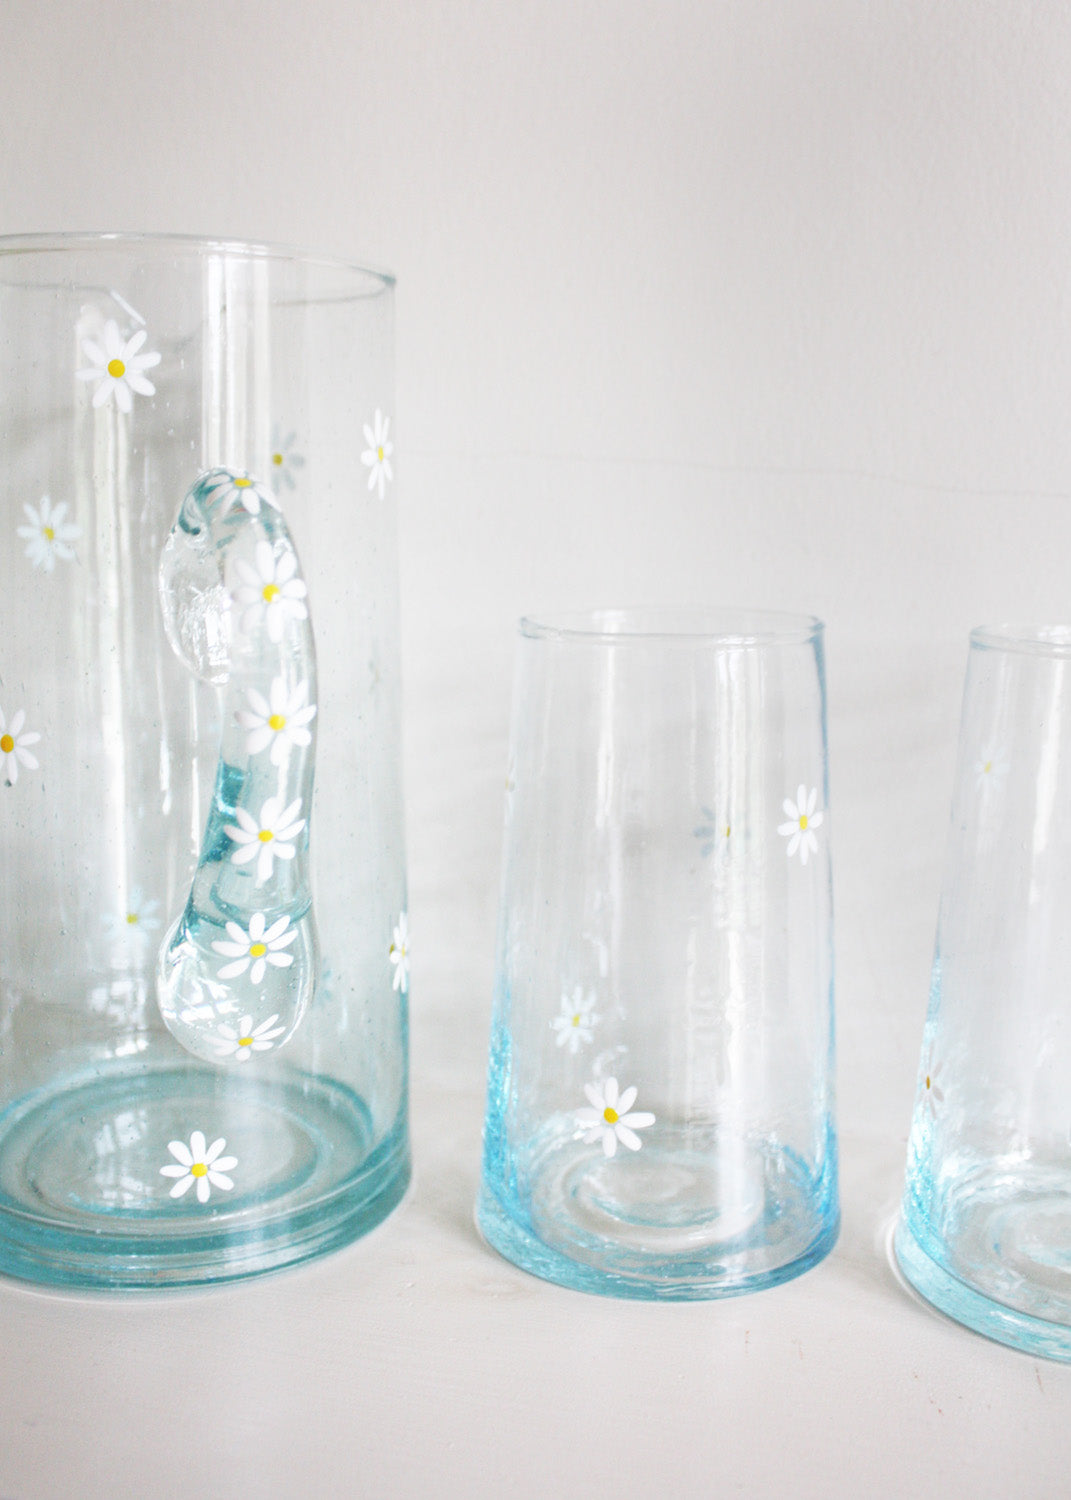 Daisy recycled glasses set of 2